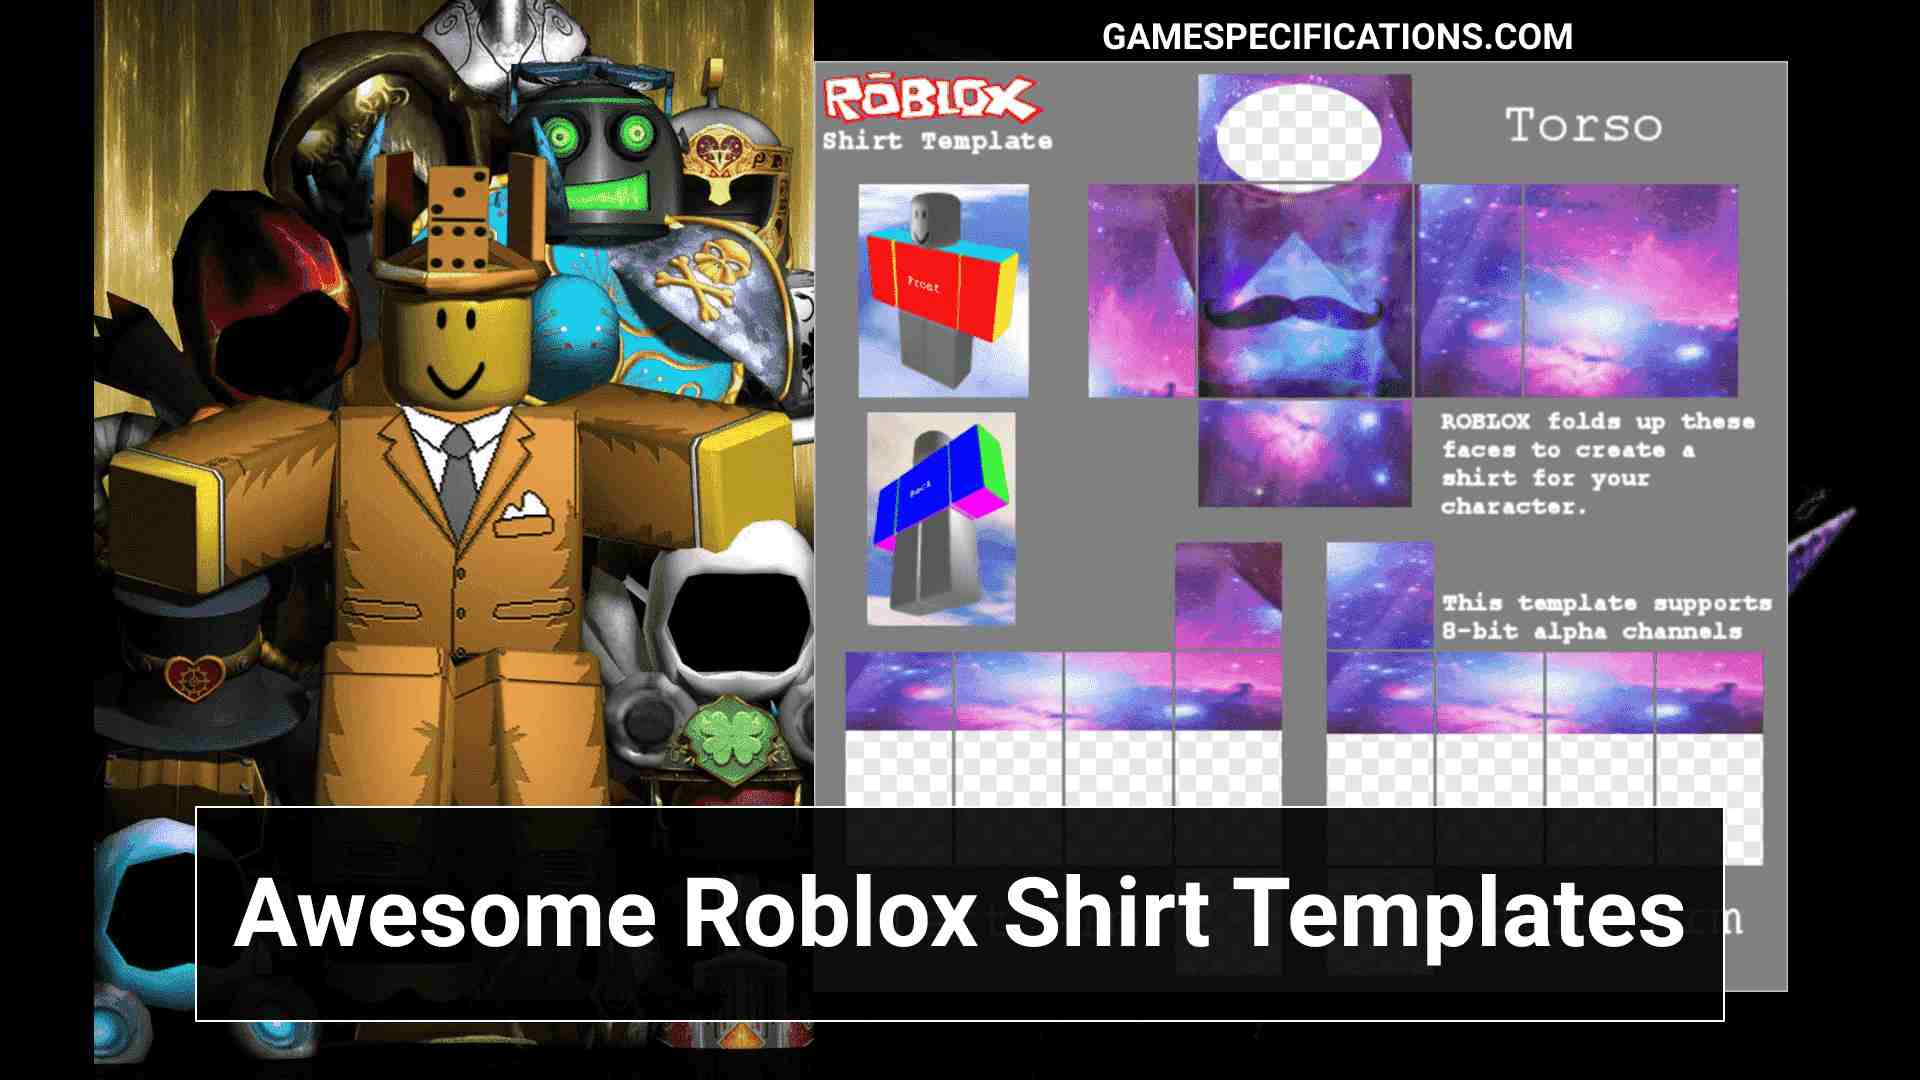 25 Coolest Roblox Shirt Templates Proved To Be The Best Game Specifications - roblox how create shirt